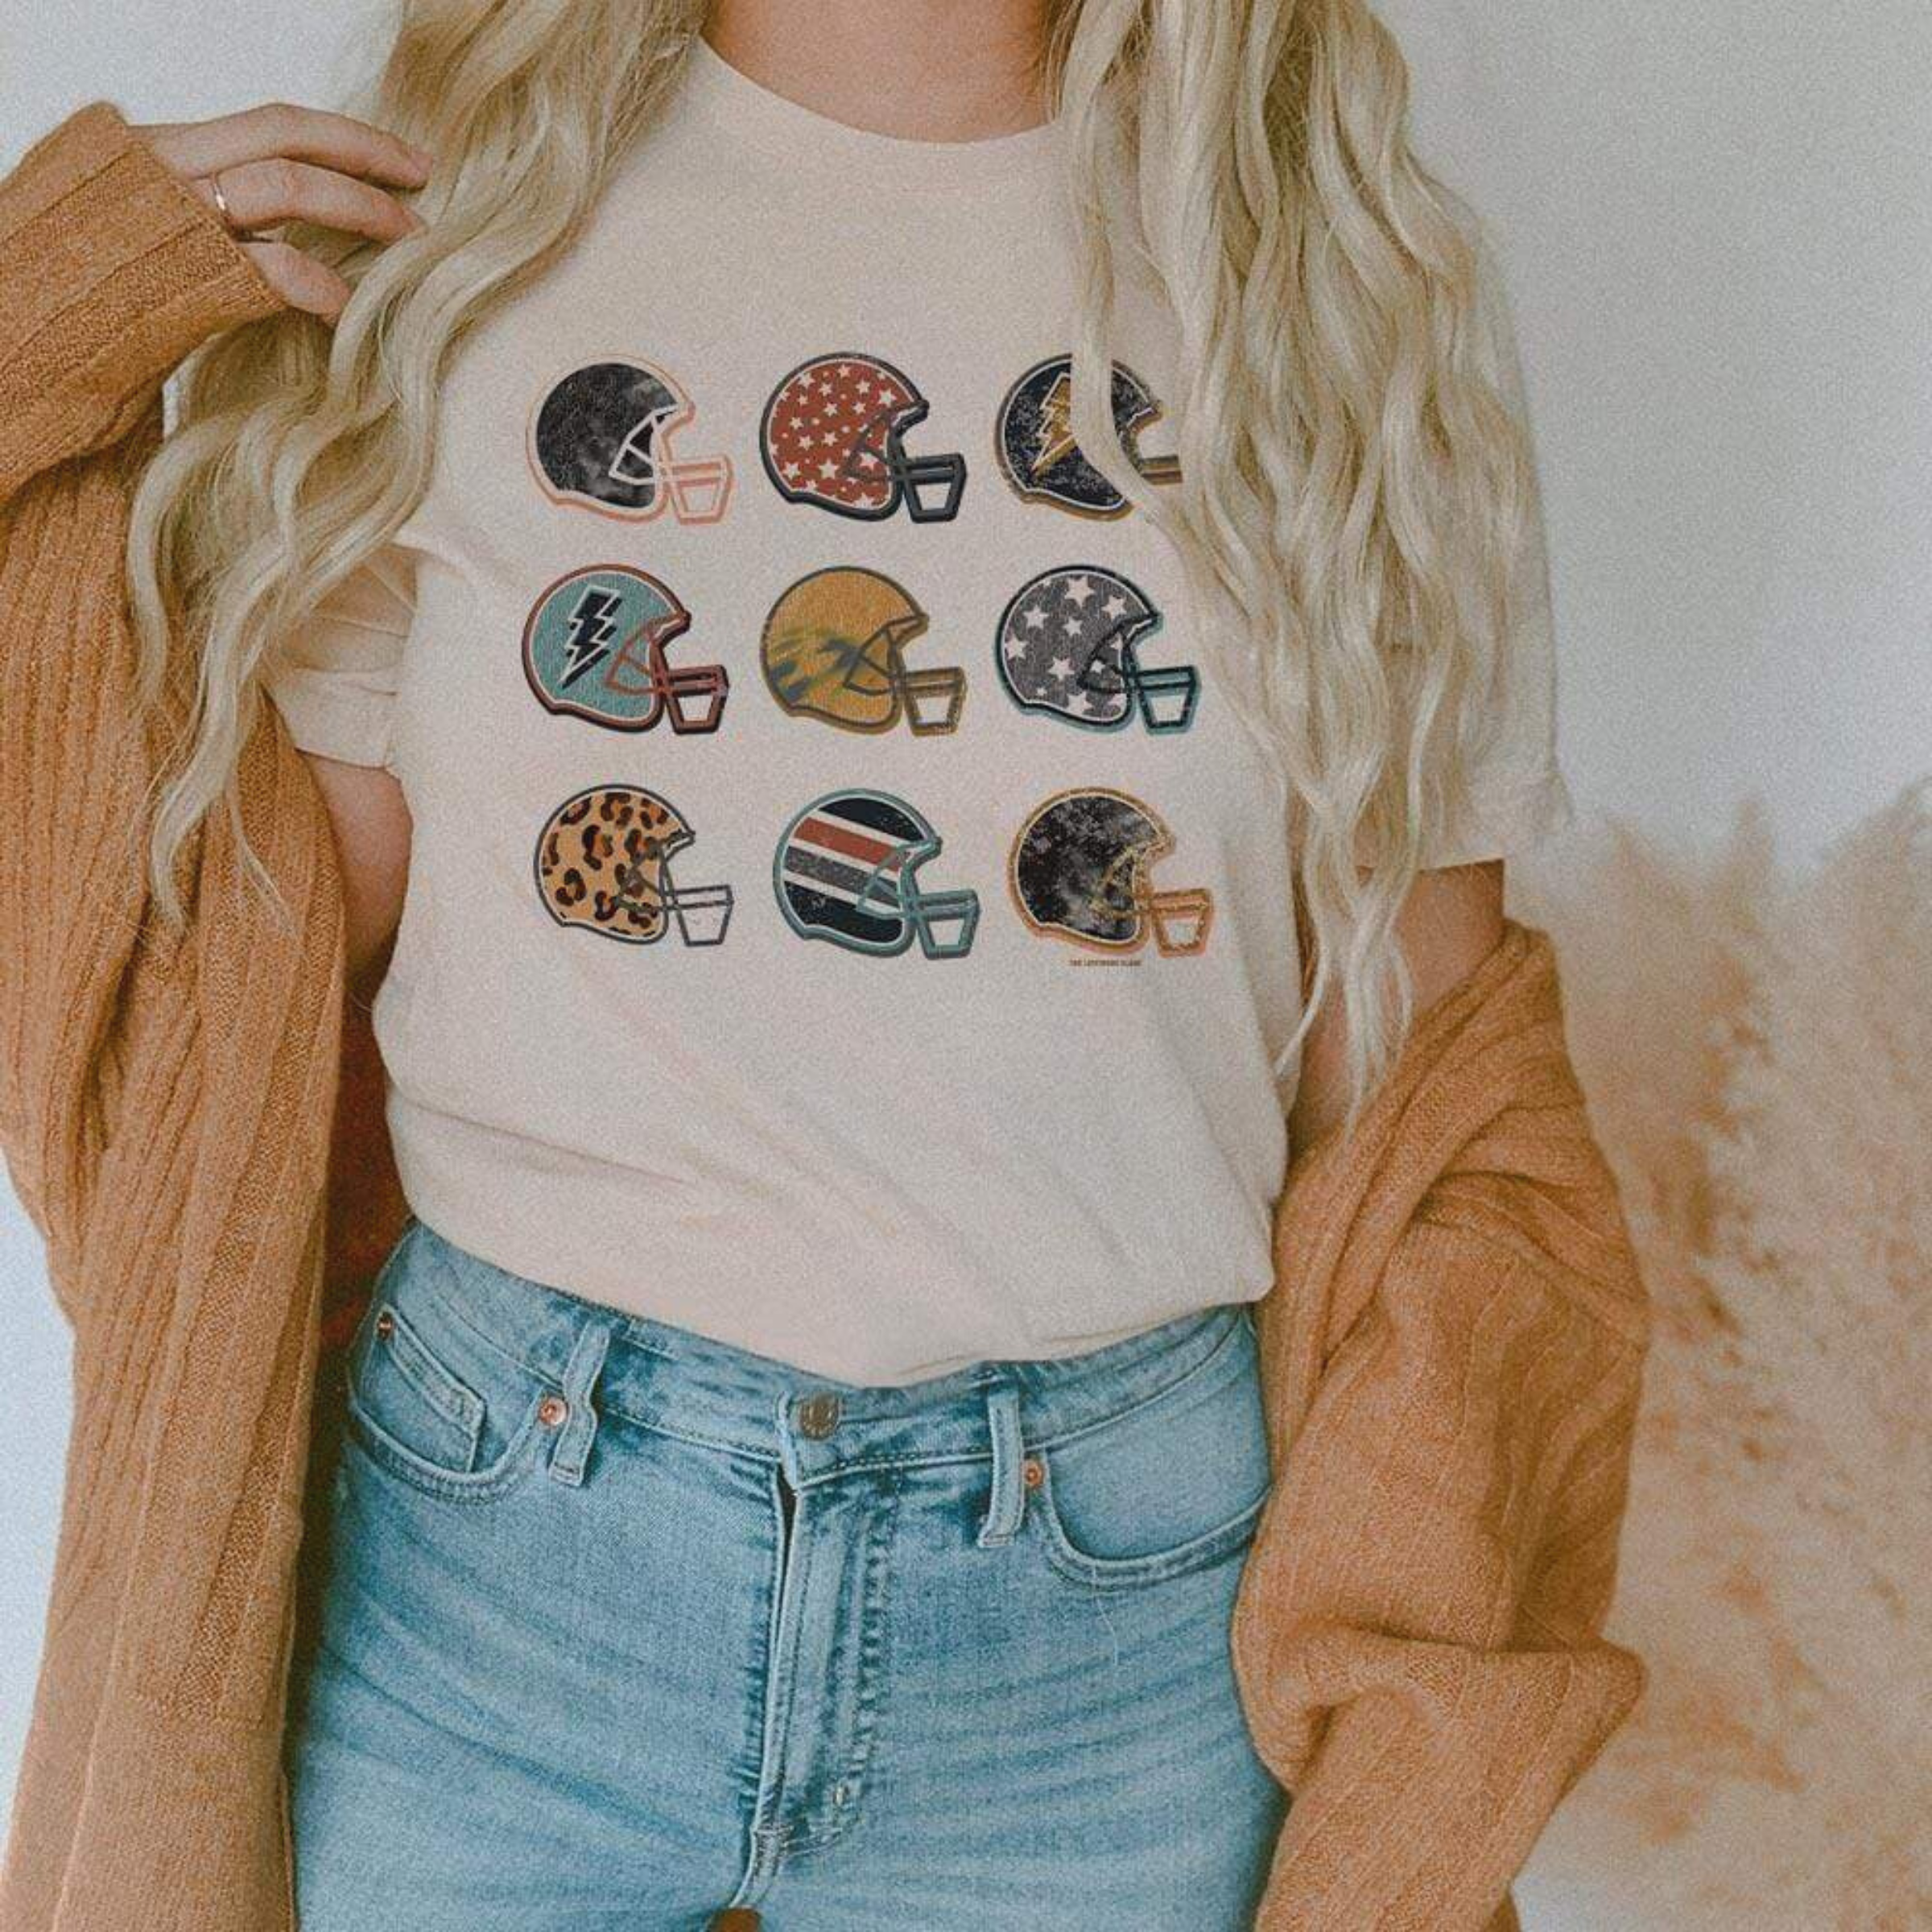 Model is wearing a cream short sleeve crewneck tee featuring a graphic of 9 football helmets, each with their unique pattern.